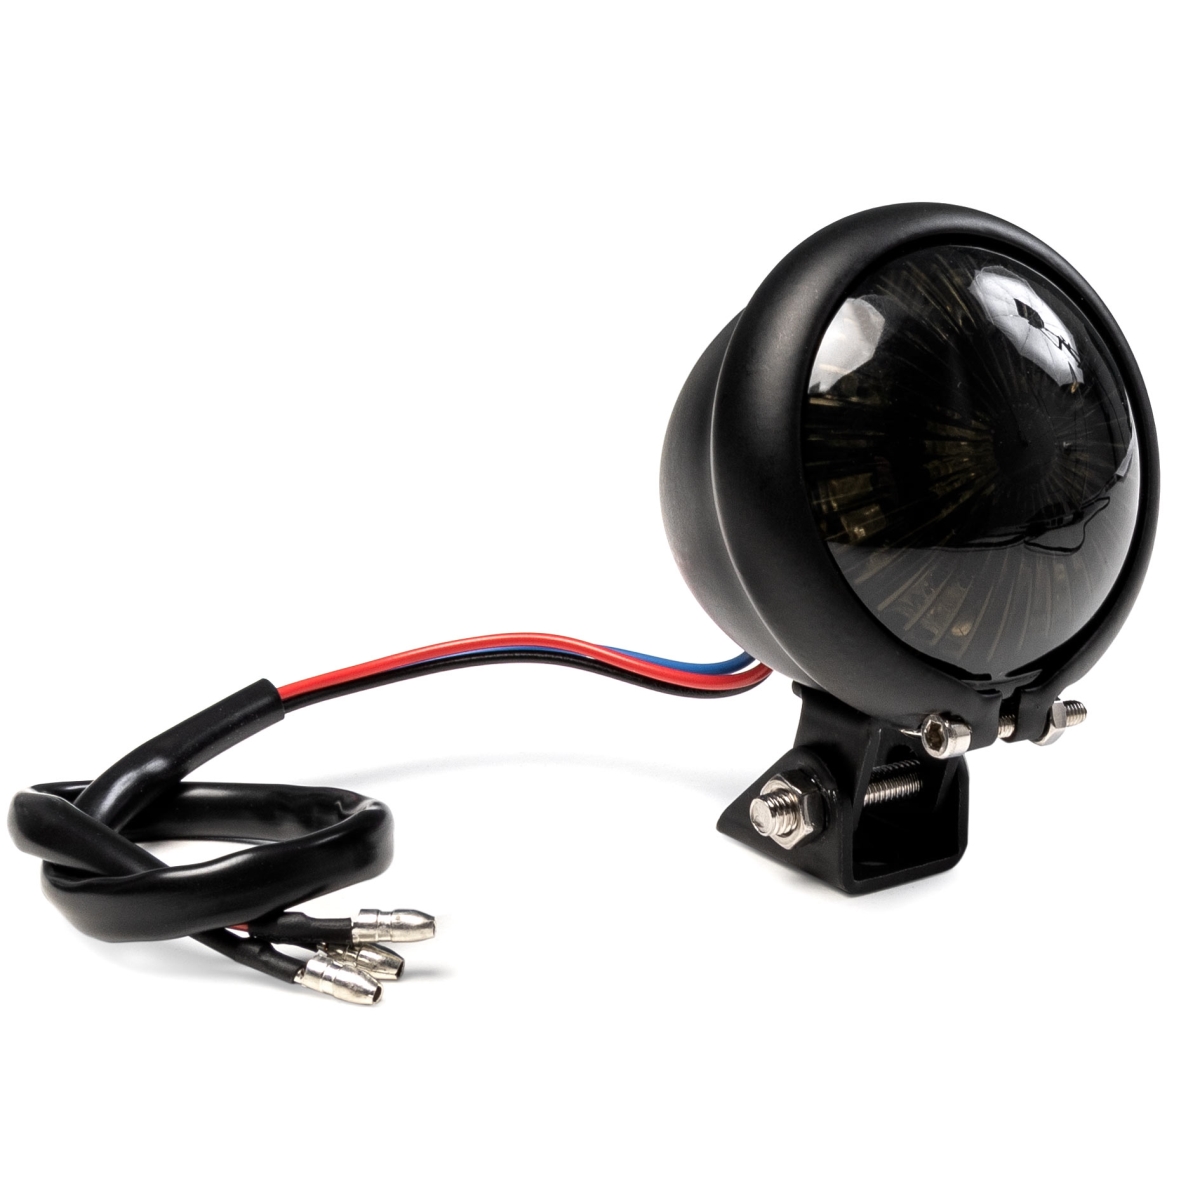 Itl-3031 Bates-style Mini Led Tail Light With Lens, Black With Smoke